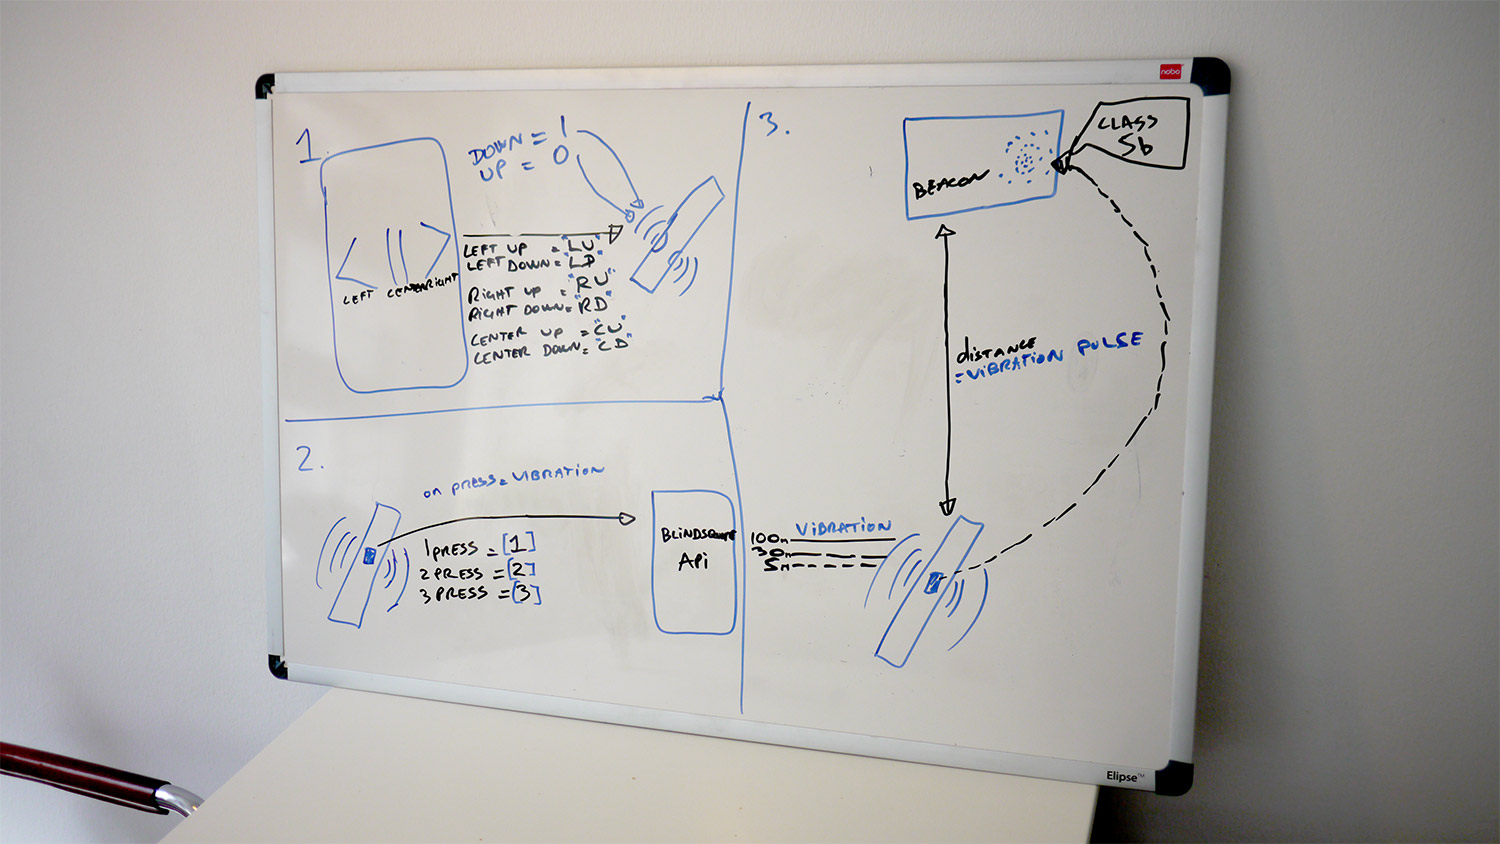 picture showing the technical architecture of the prototypes drawn on a white-board